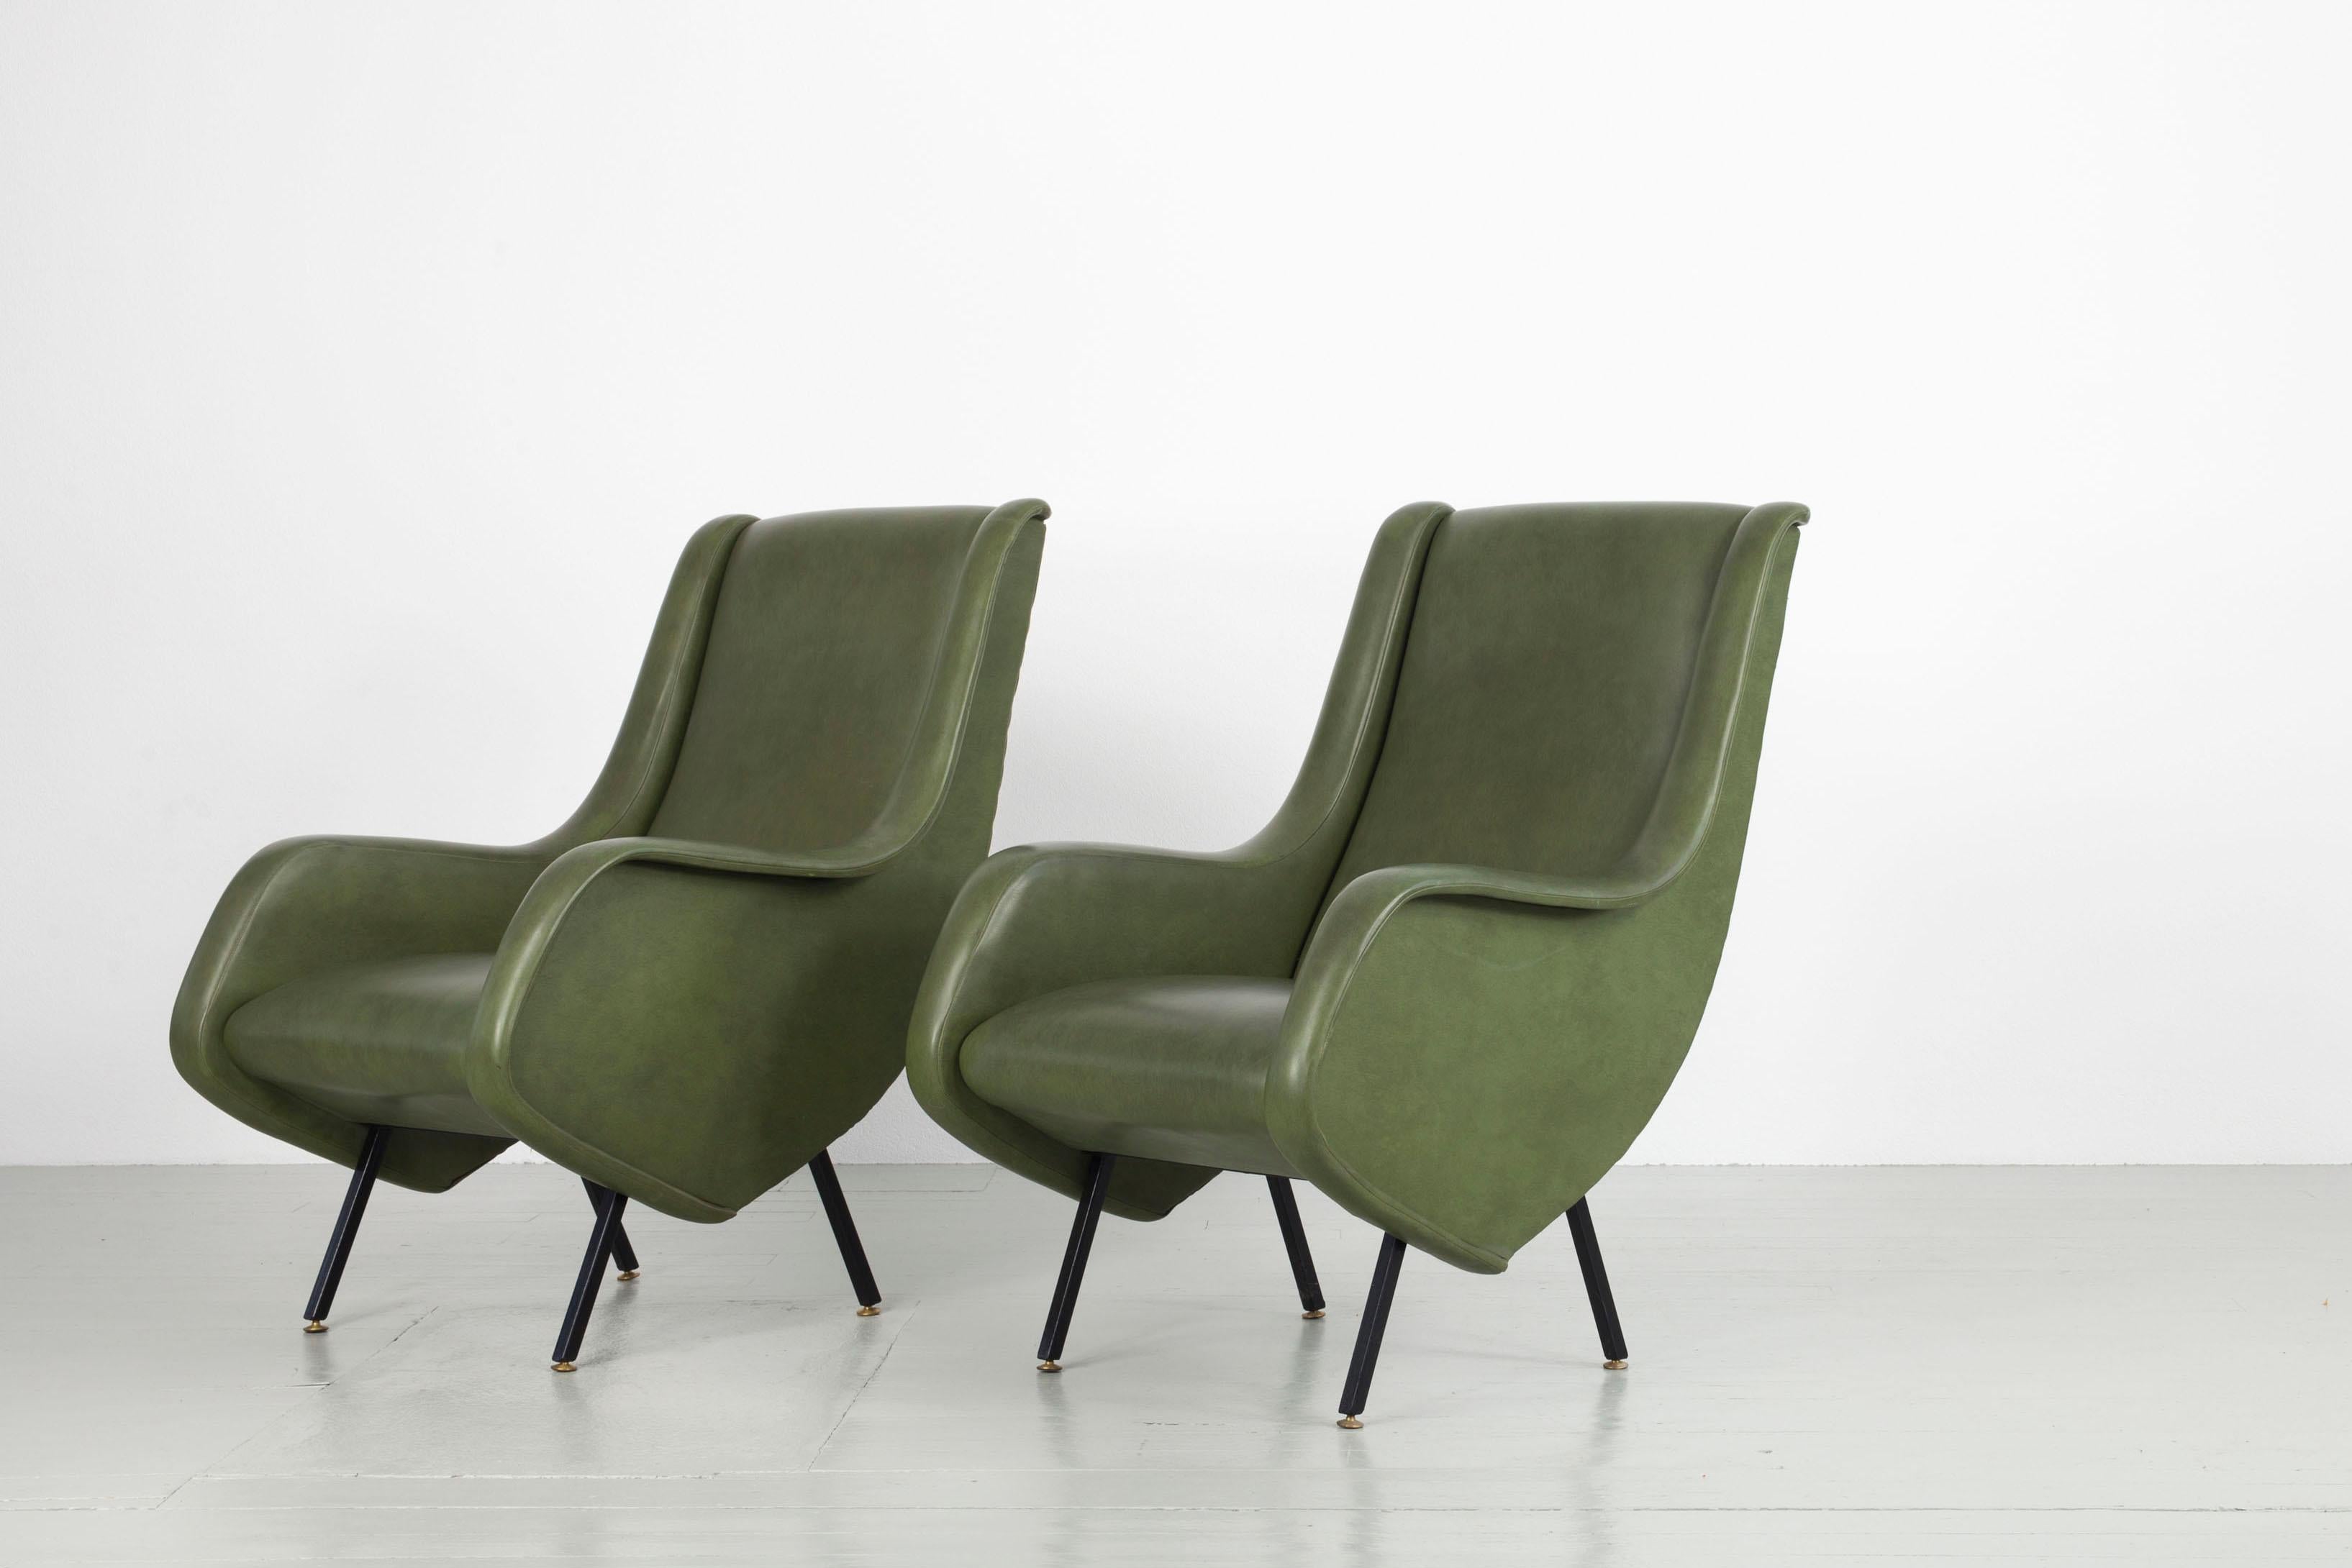 Mid-20th Century Pair of Italian Midcentury Armchairs in Original Green Fauxleather, 1950s For Sale